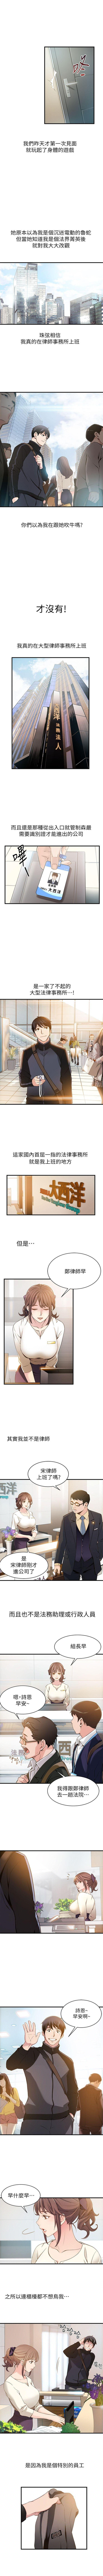 Pissing 弱點 1-94 官方中文（連載中） Female - Page 4